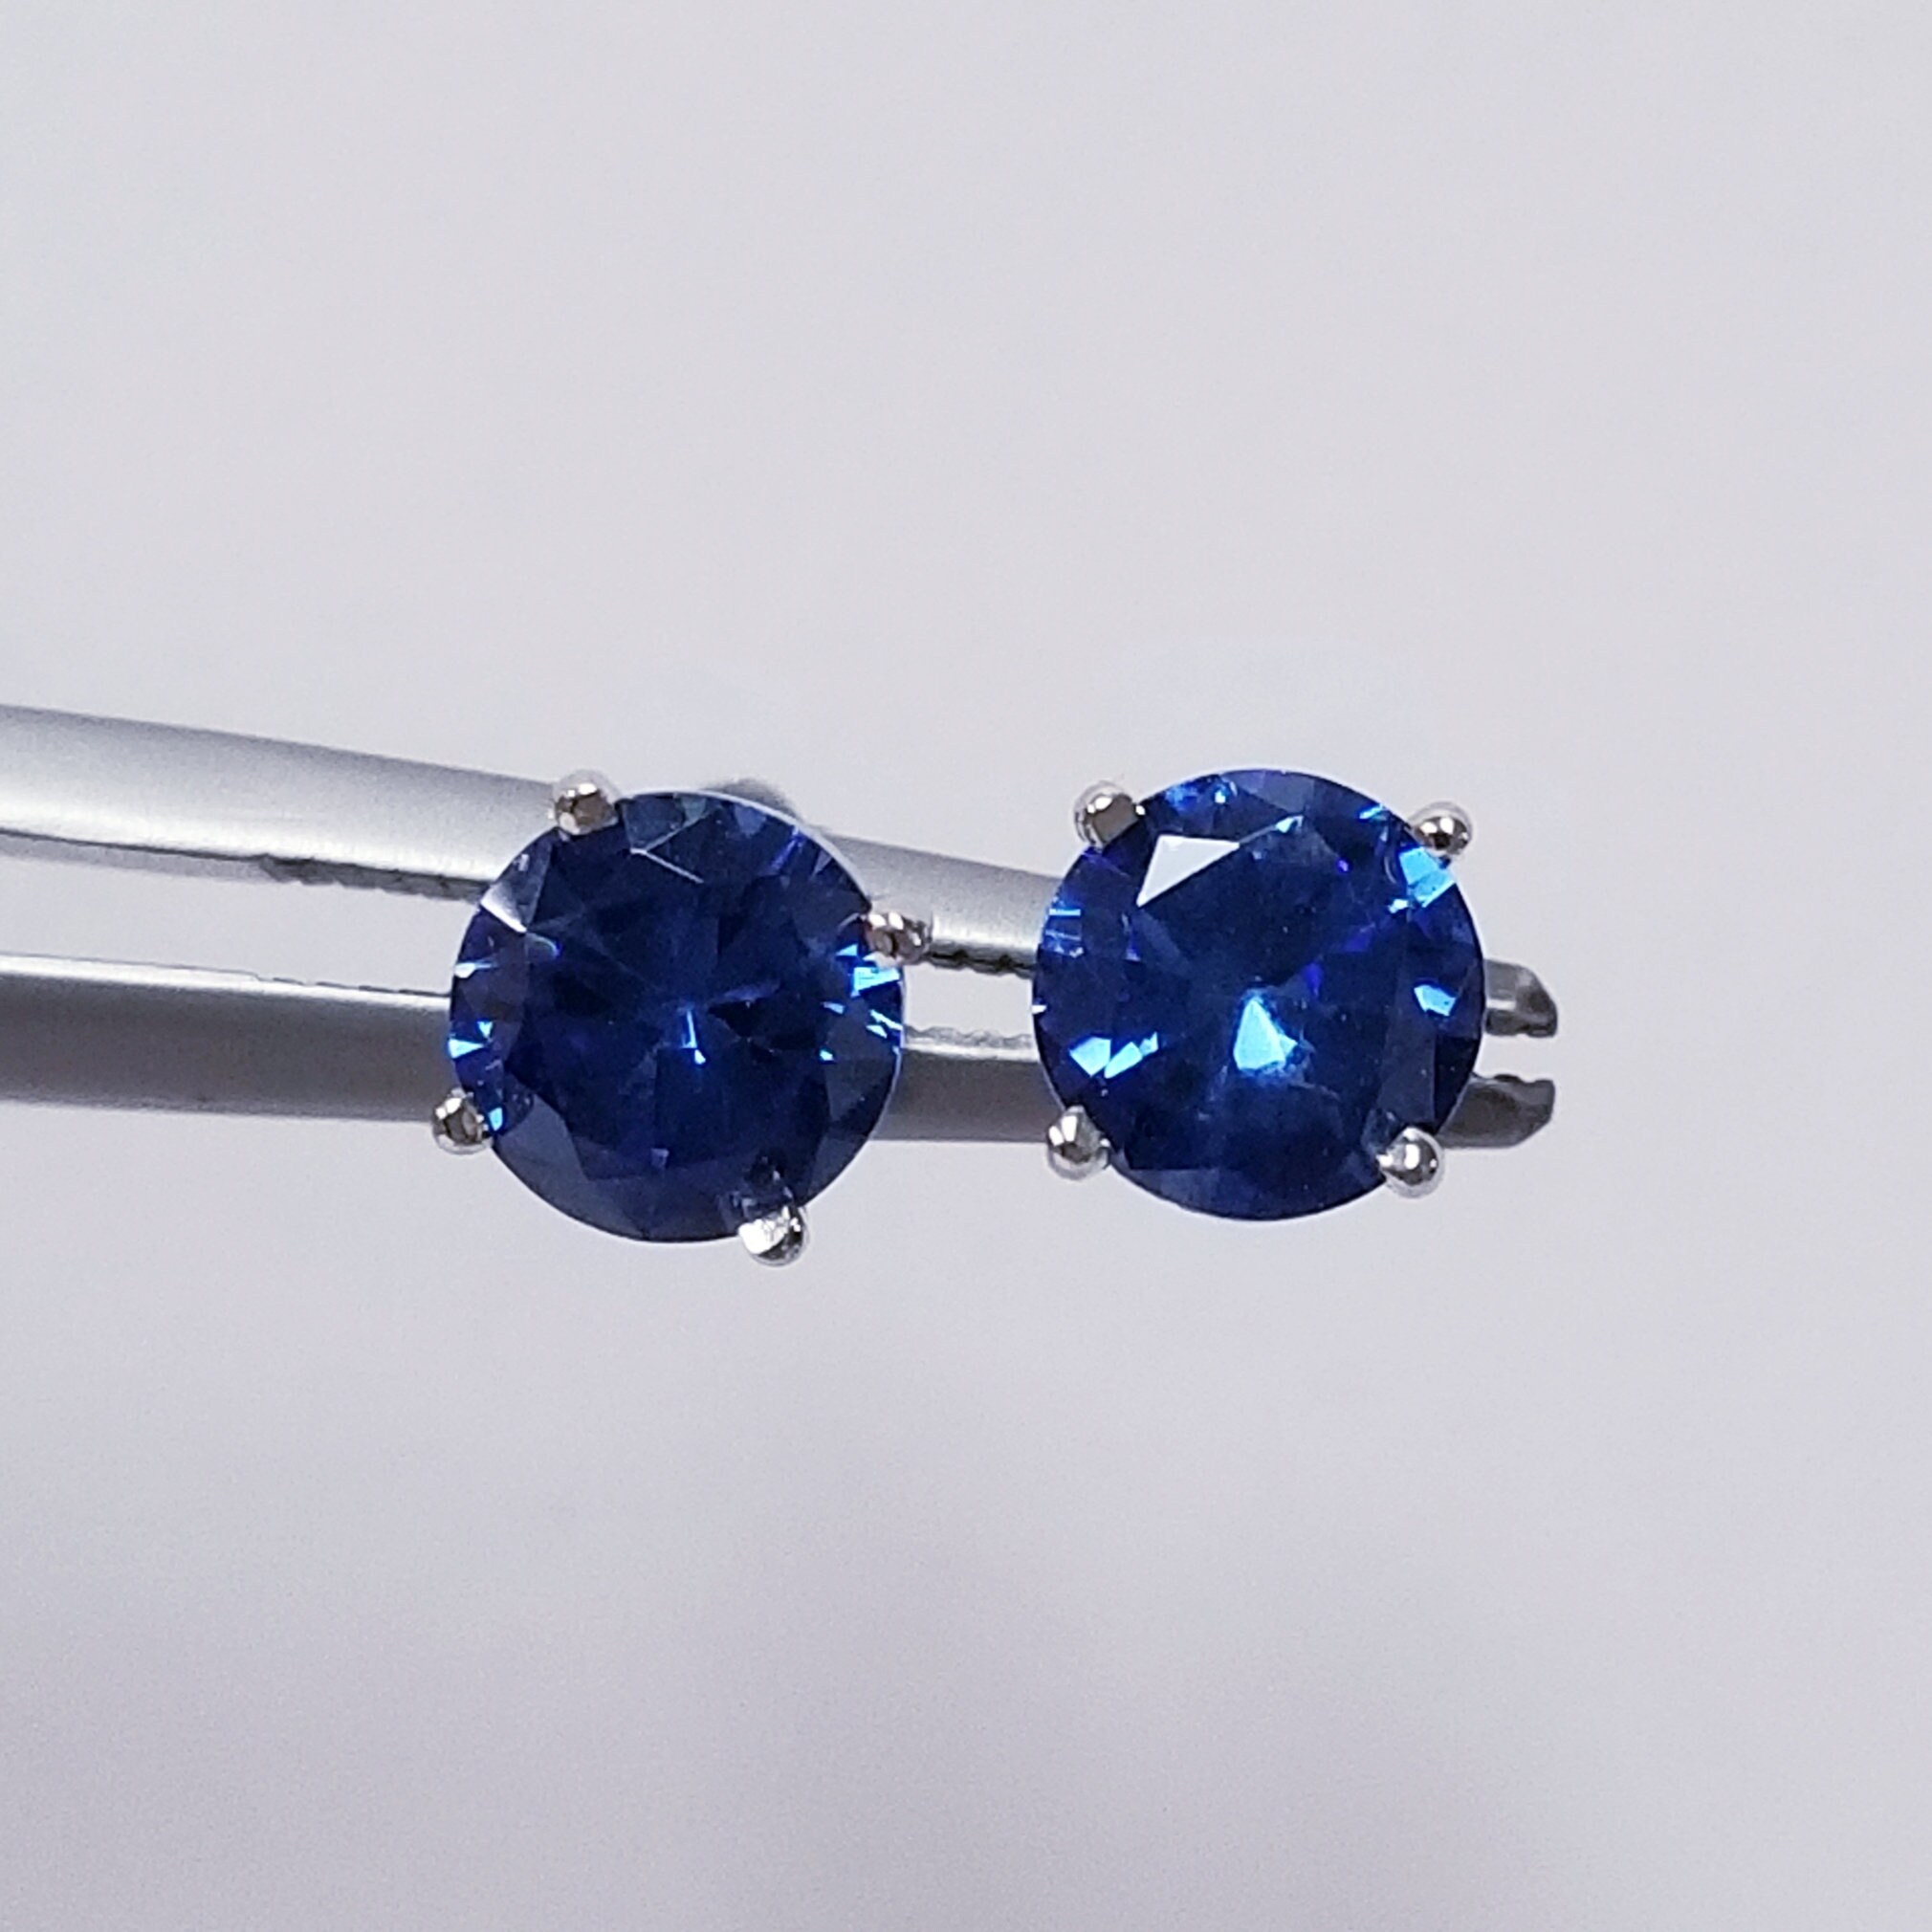 6mm Estate New 14k Yellow Gold Created 1ct Tanzanite or Sapphire Earrings Studs GE16-3